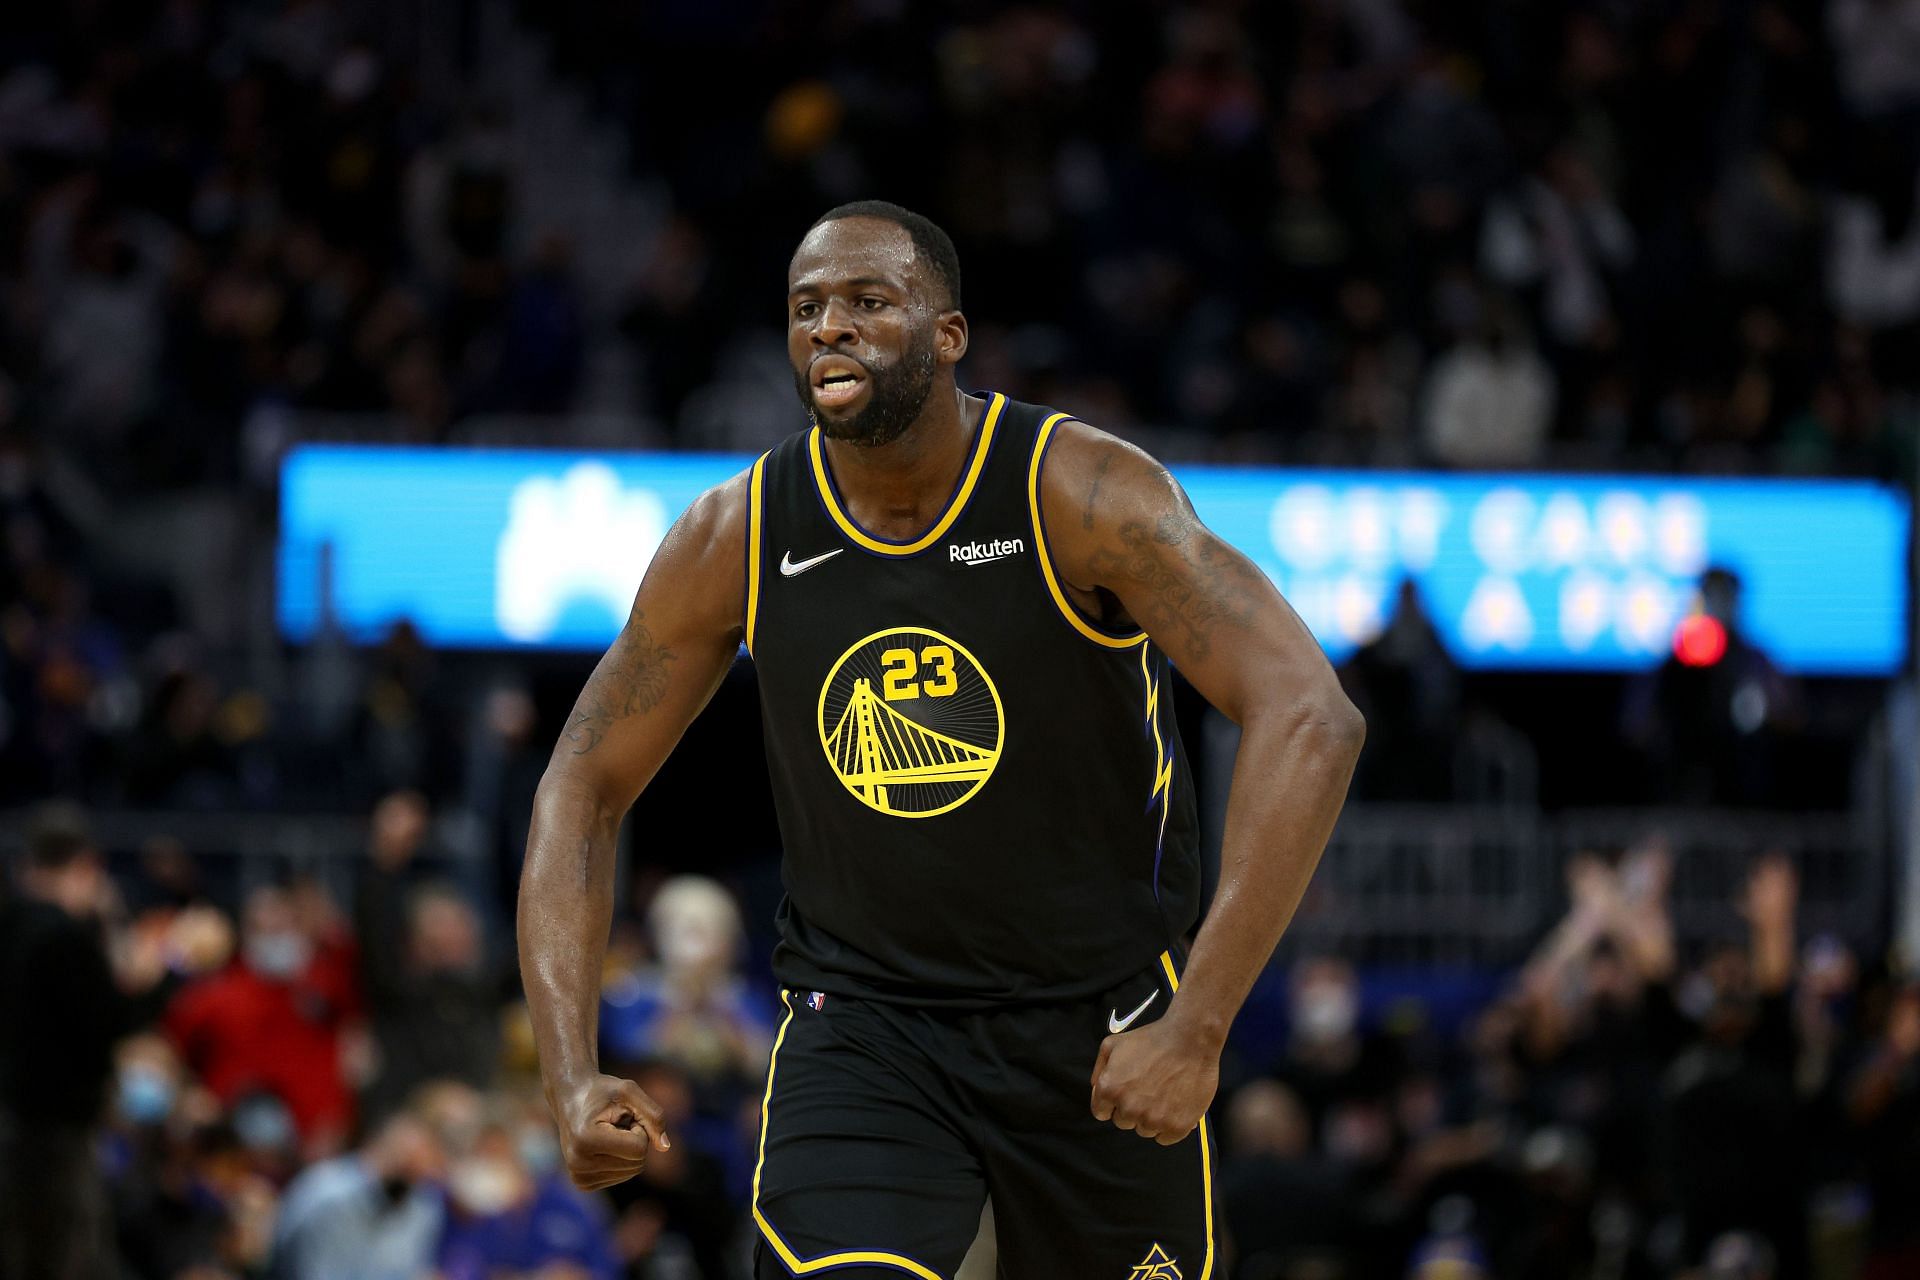 Draymond Green #23 reacts after Jordan Poole #3 of the Golden State Warriors dunks the ball on Omer Yurtseven #77 of the Miami Heat in the second half at Chase Center on January 03, 2022 in San Francisco, California.